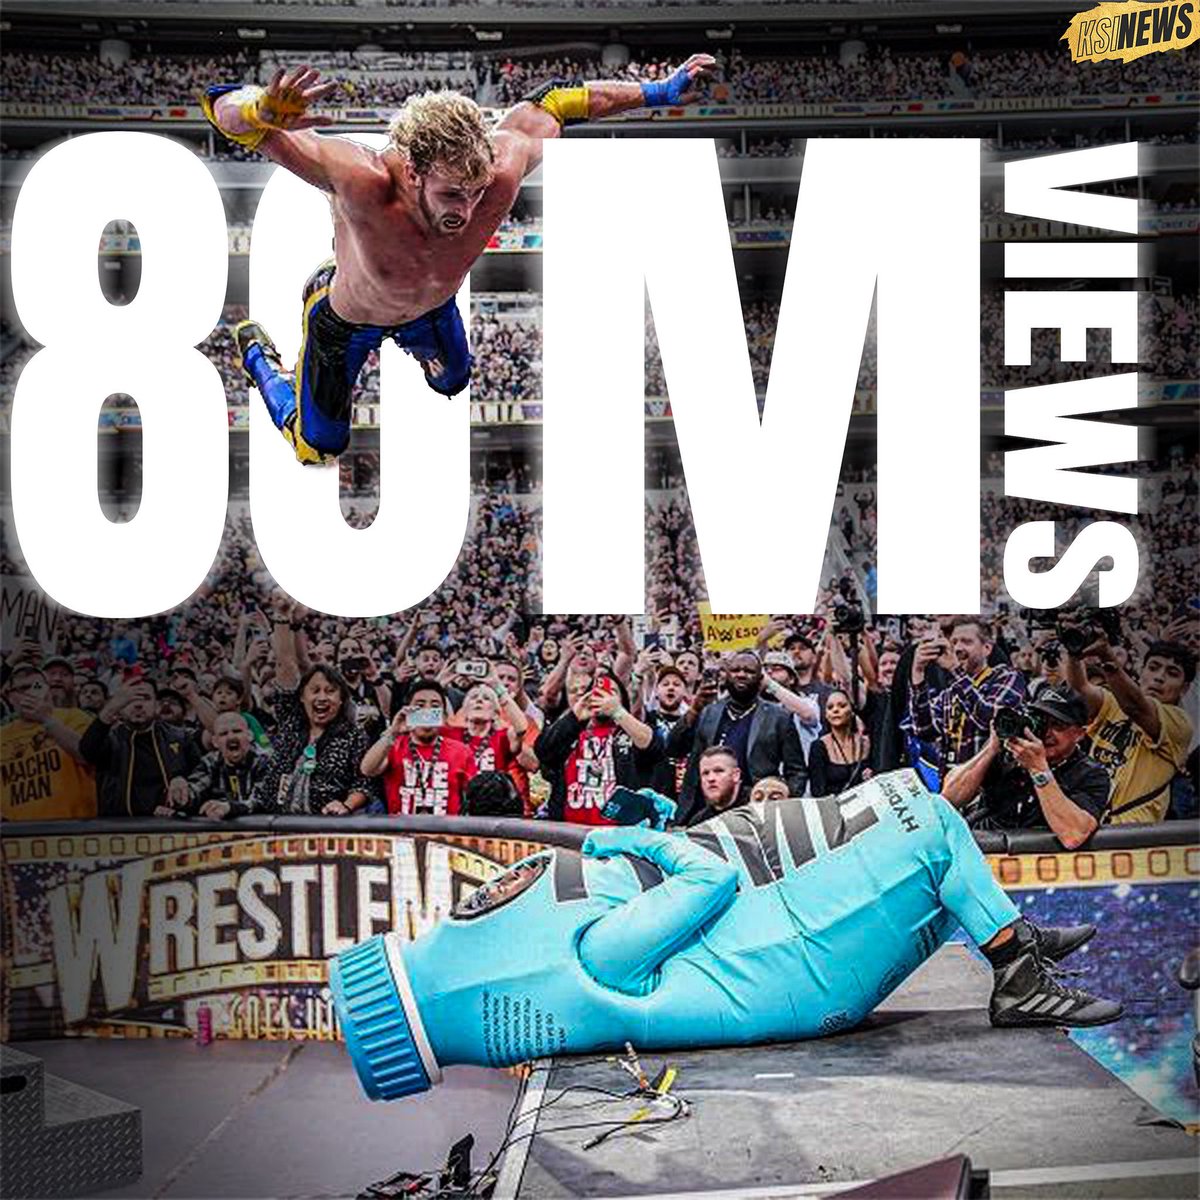 Logan Paul’s frog splash on KSI was the most viral moment of Wrestlemania 39 with over 80M impressions 🤯